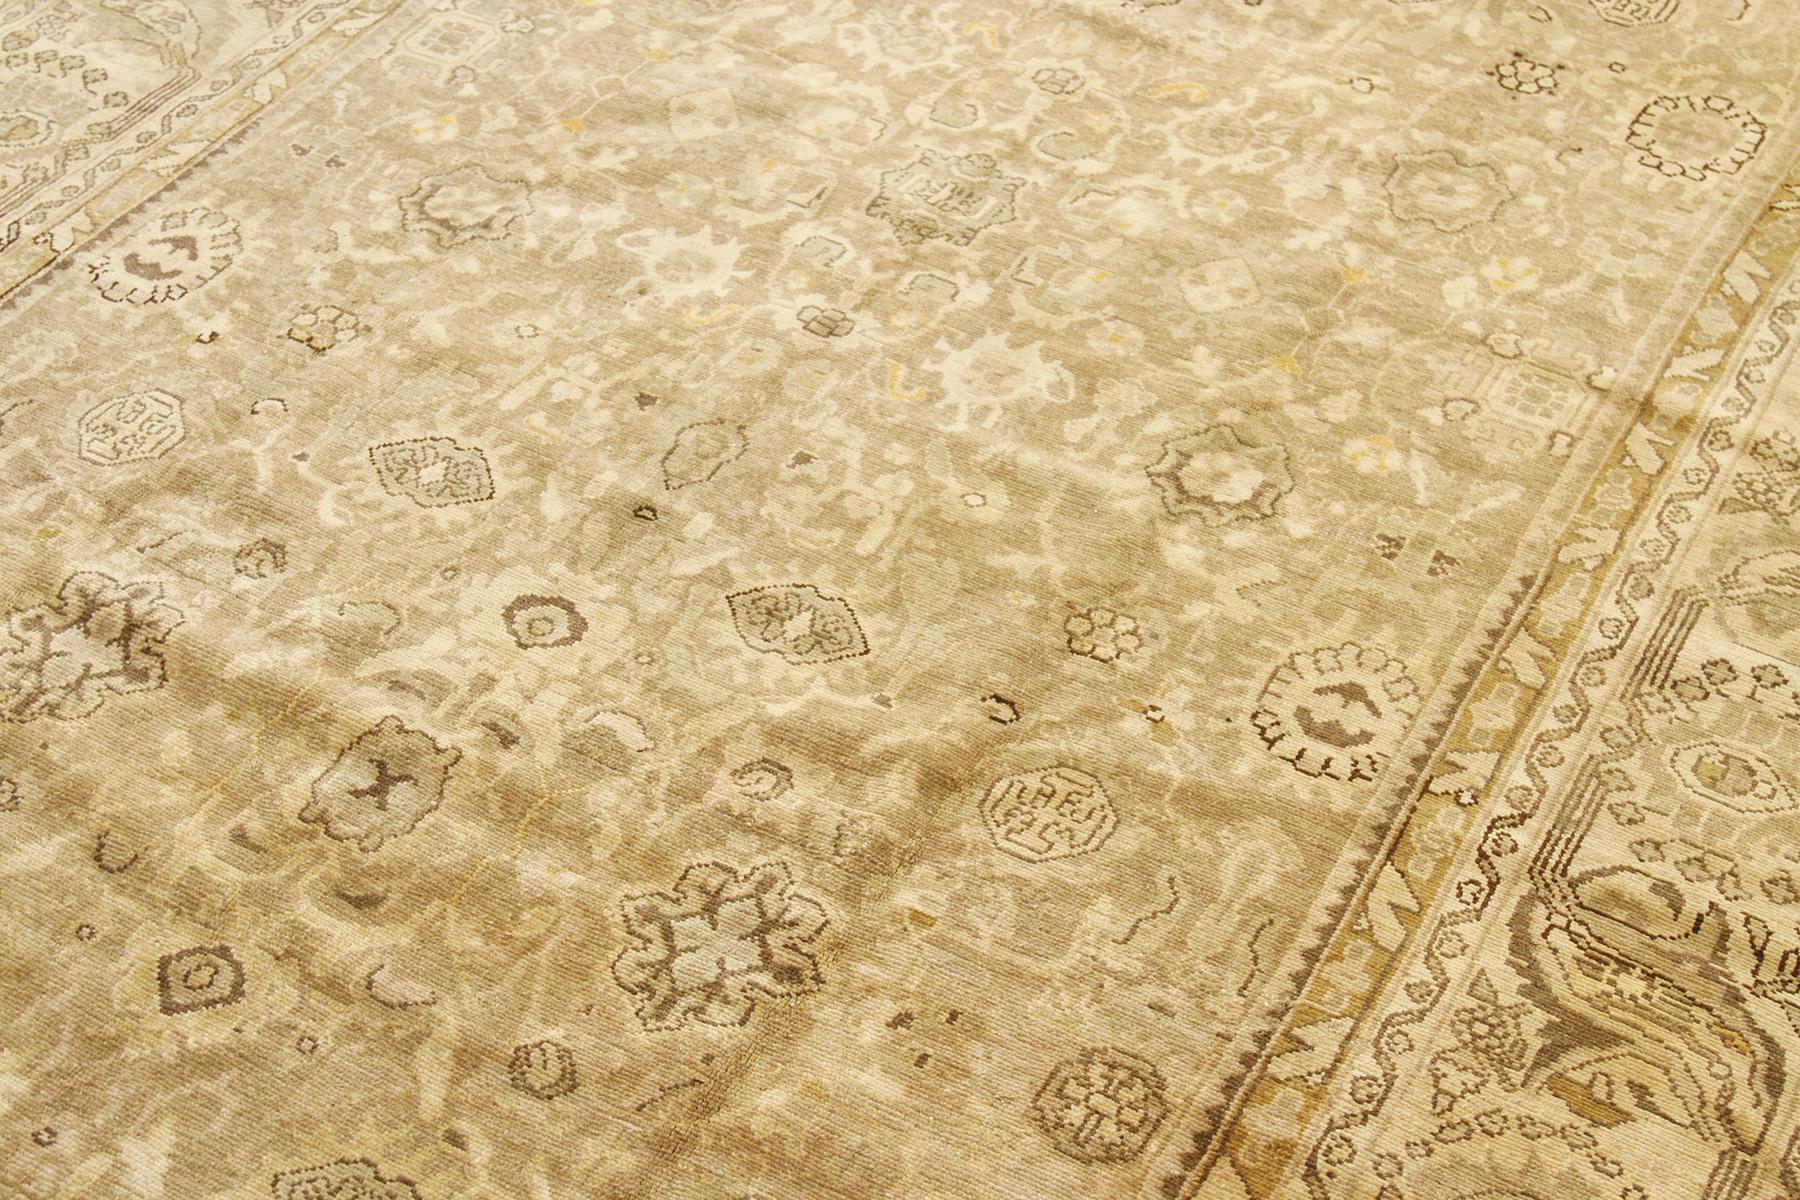 Hand-Woven Antique Persian Malayer Rug with Brown and Beige Flower Motifs on Ivory Field For Sale